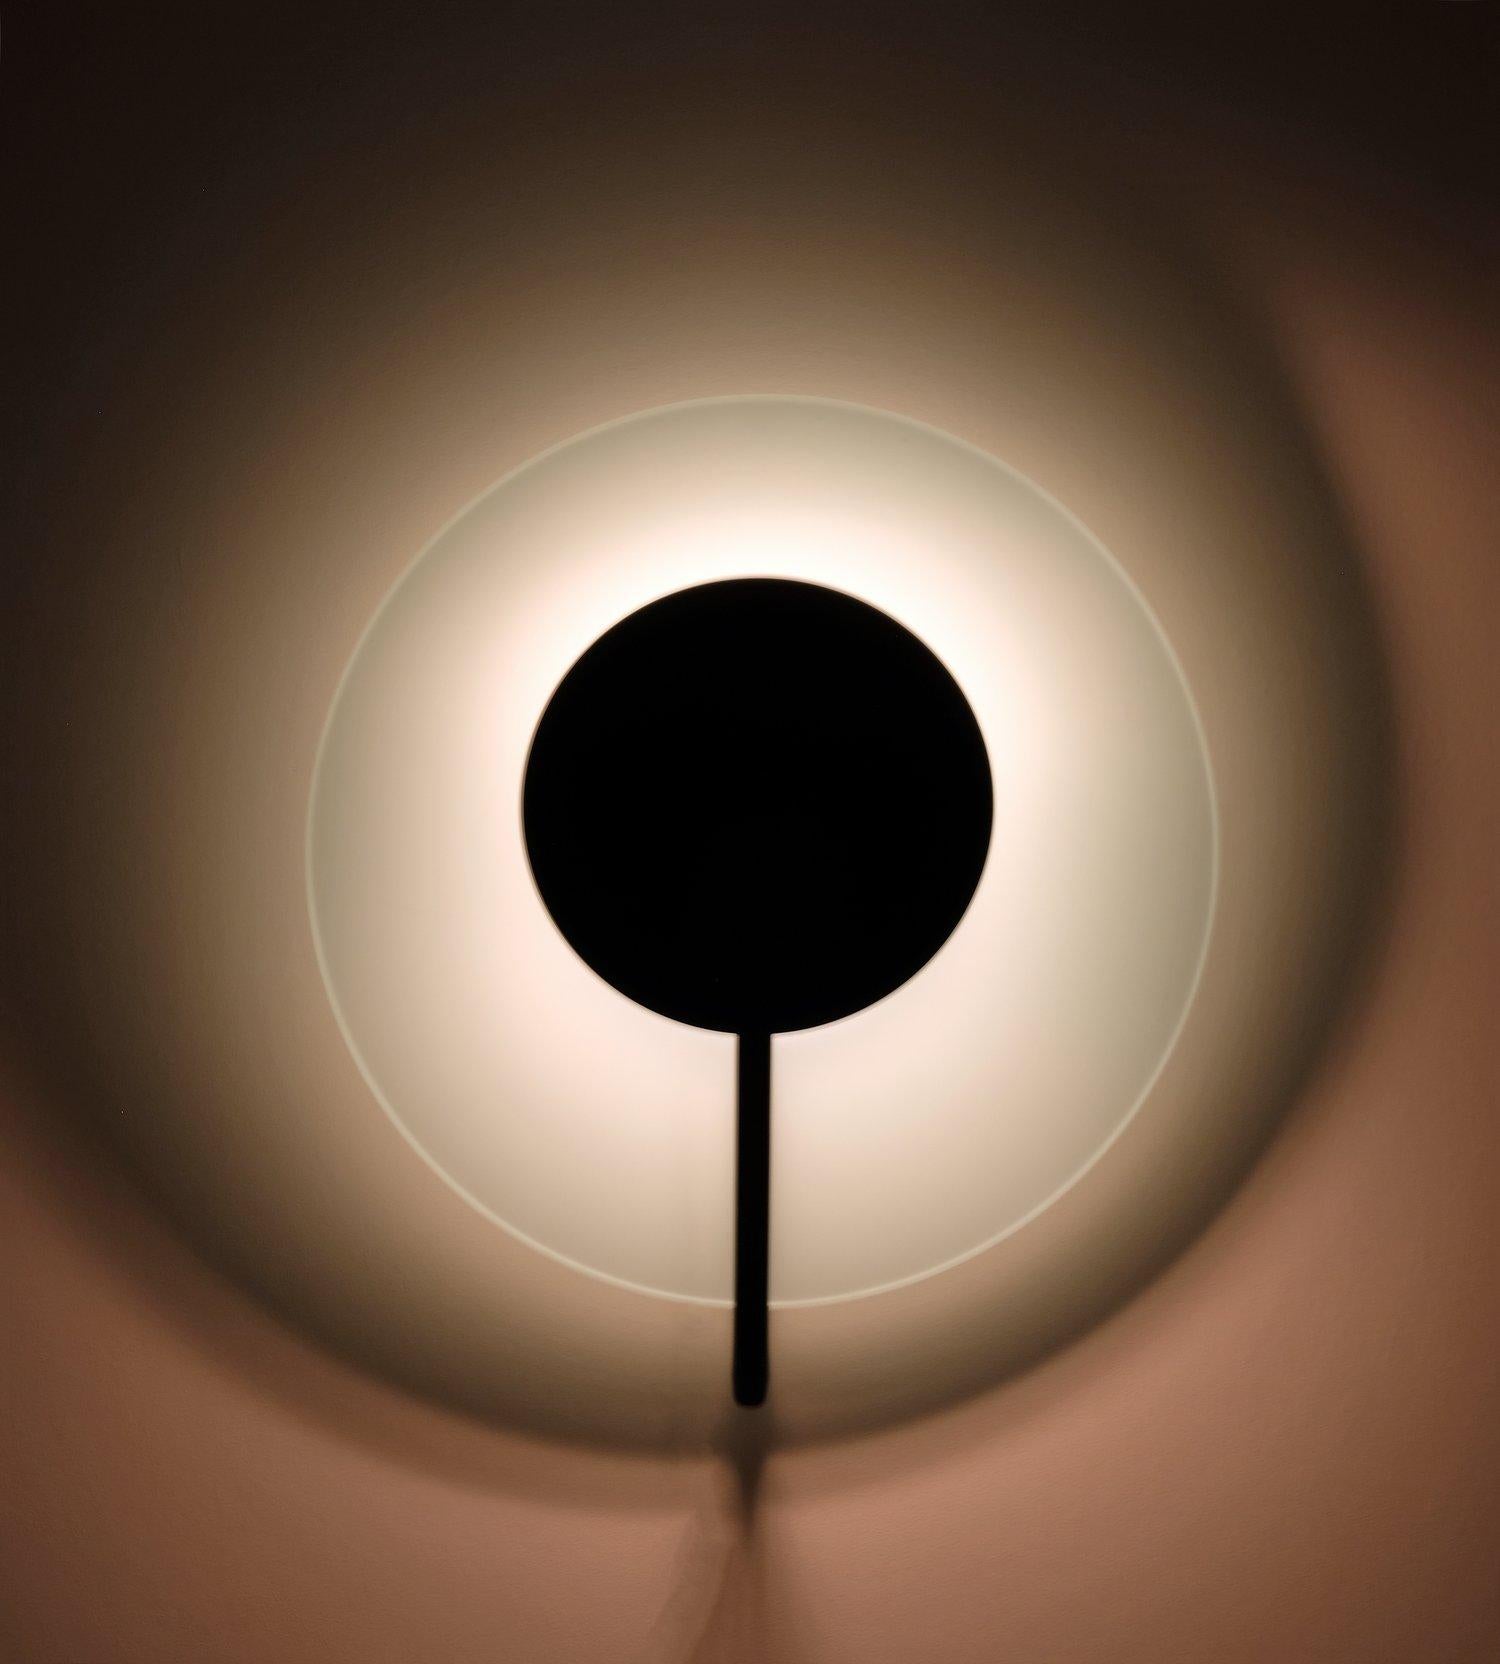 Vega, Tre Ci Luce wall light by Cesaro e Amico. Frosted glass plate, enameled steel structure. Measure: 8mm halogen bulb, 130v recommended, hard wire.